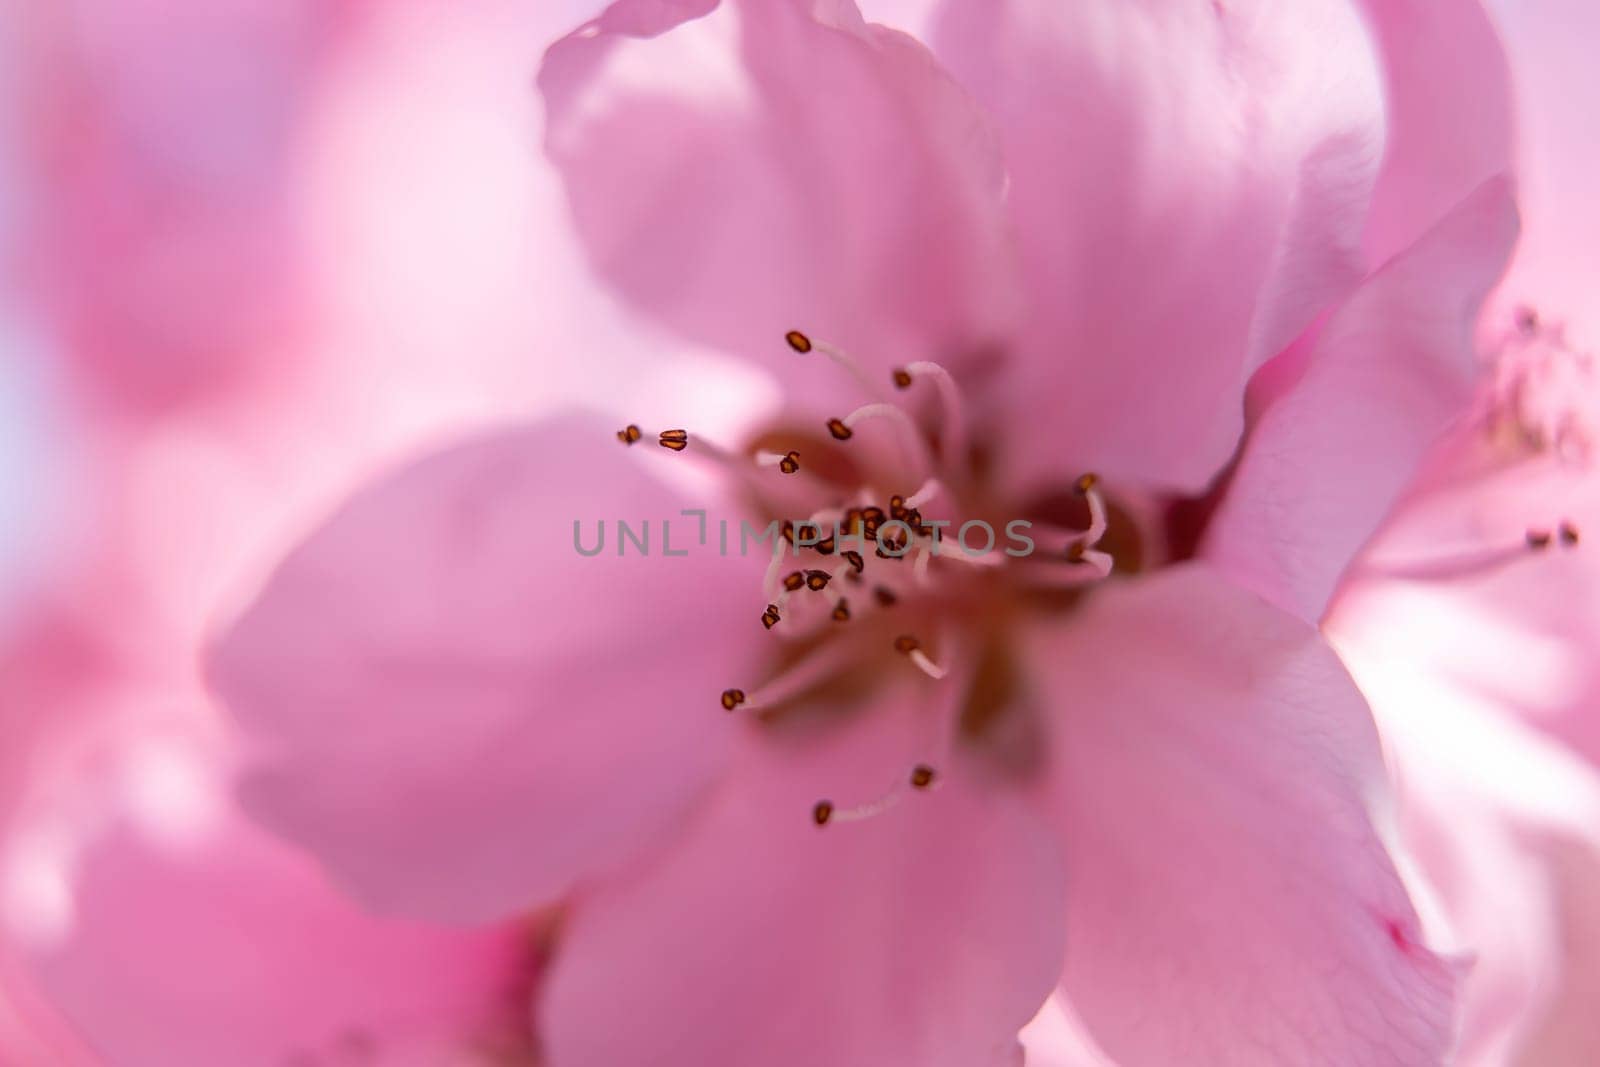 close up pink peach flower with a fuzzy, blurry background. The flower is the main focus of the image, and the background is intentionally blurred to draw attention to the flower. by Matiunina